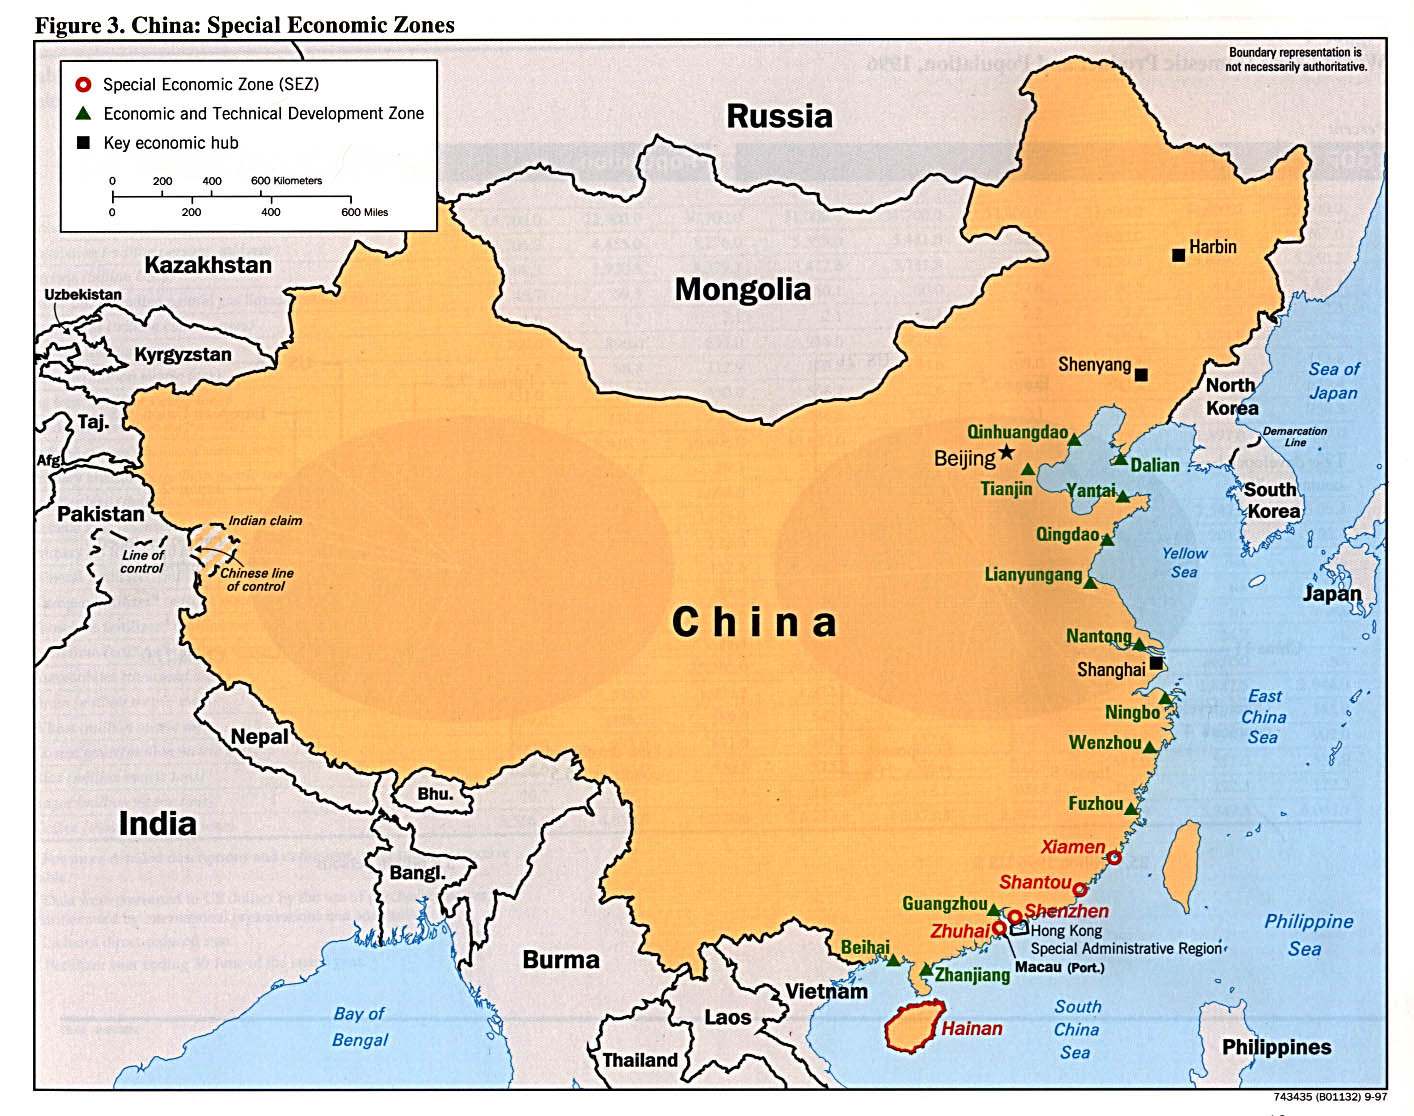 Detailed Special Economic Zones Map Of China 1997 China